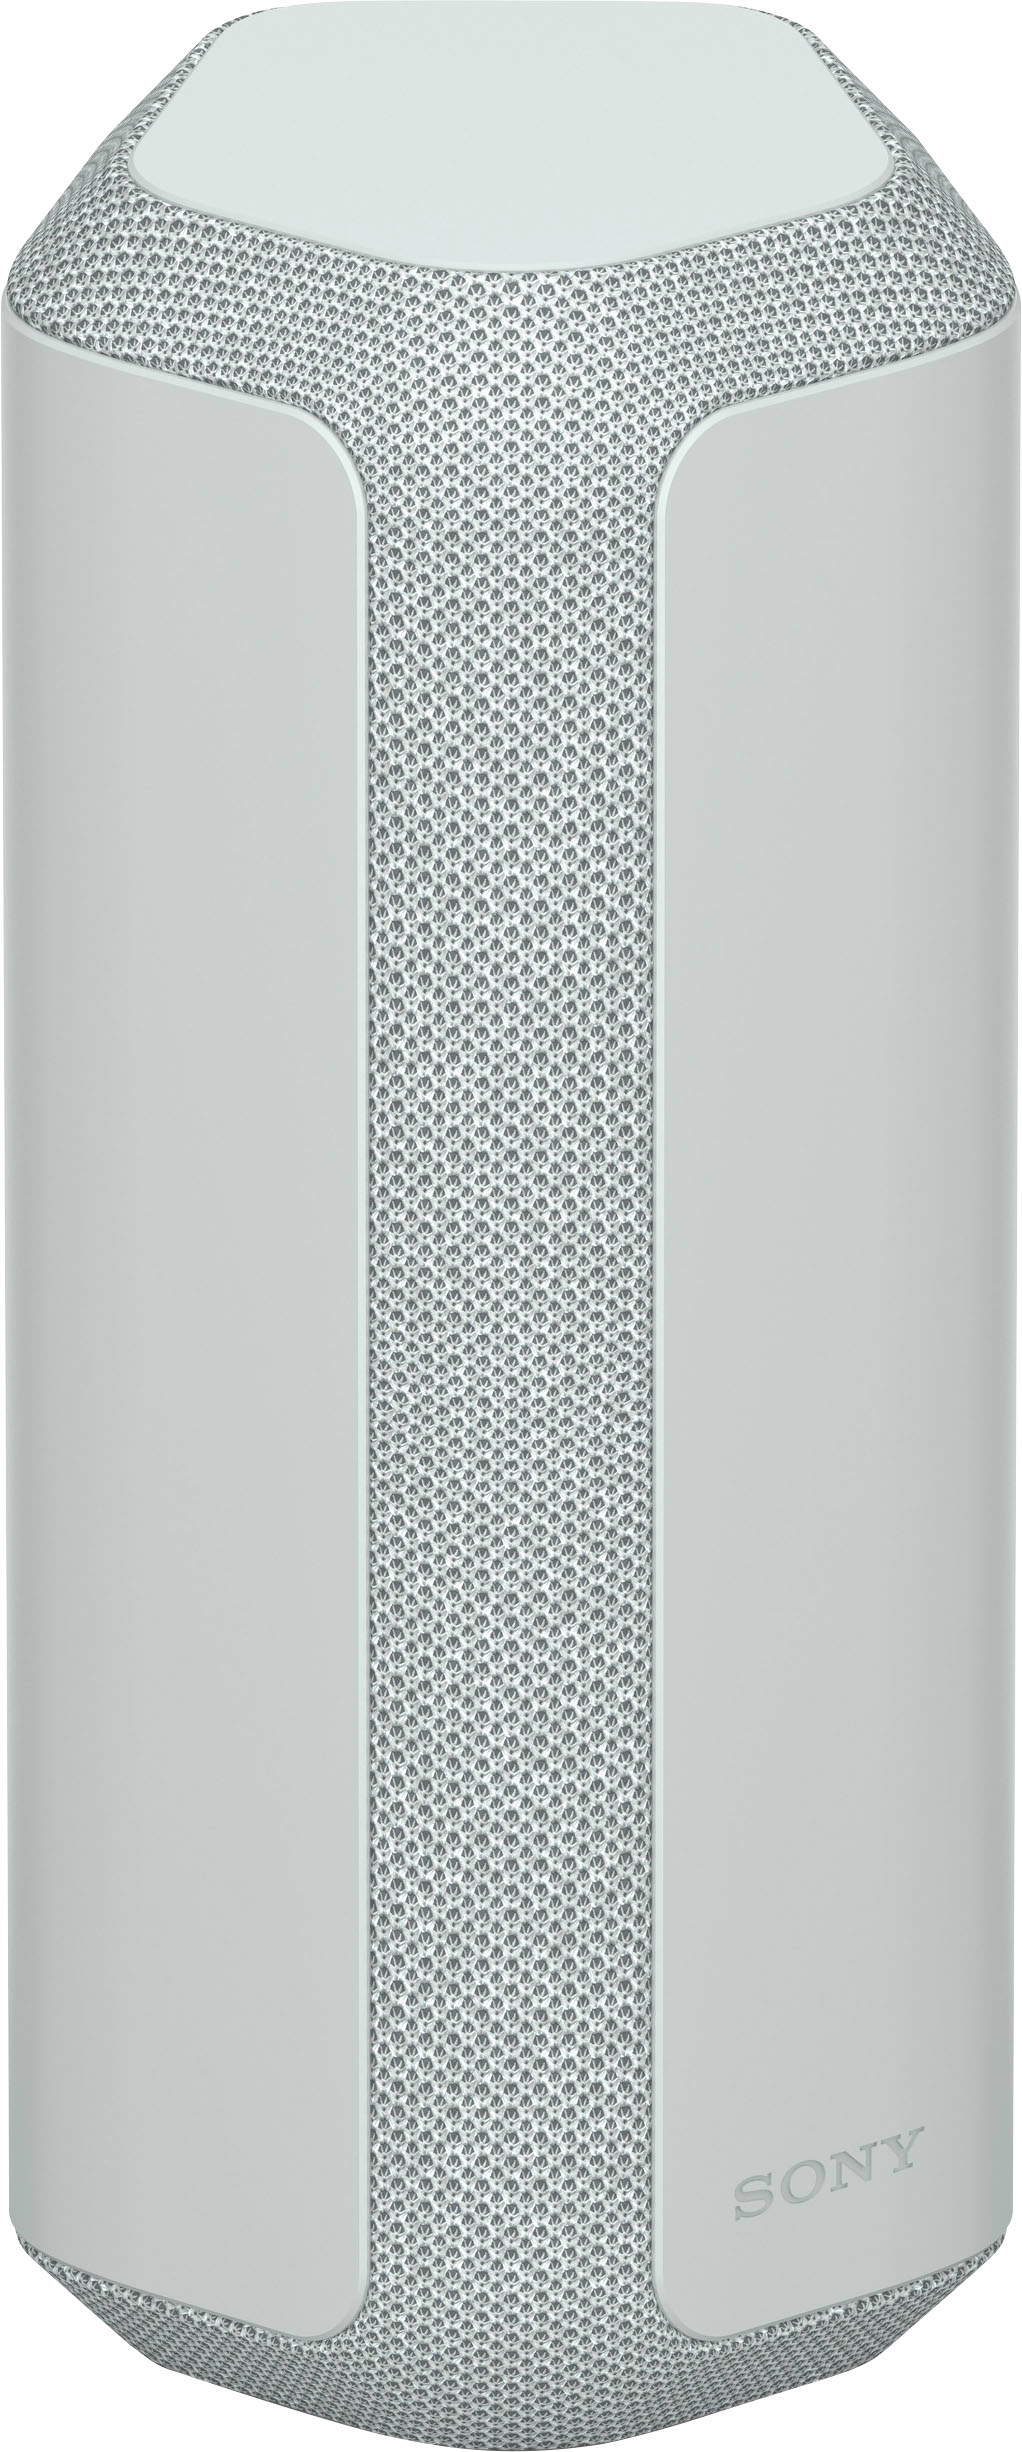 Angle View: Sony - XE300 Portable Waterproof and Dustproof Bluetooth Speaker - Light Gray